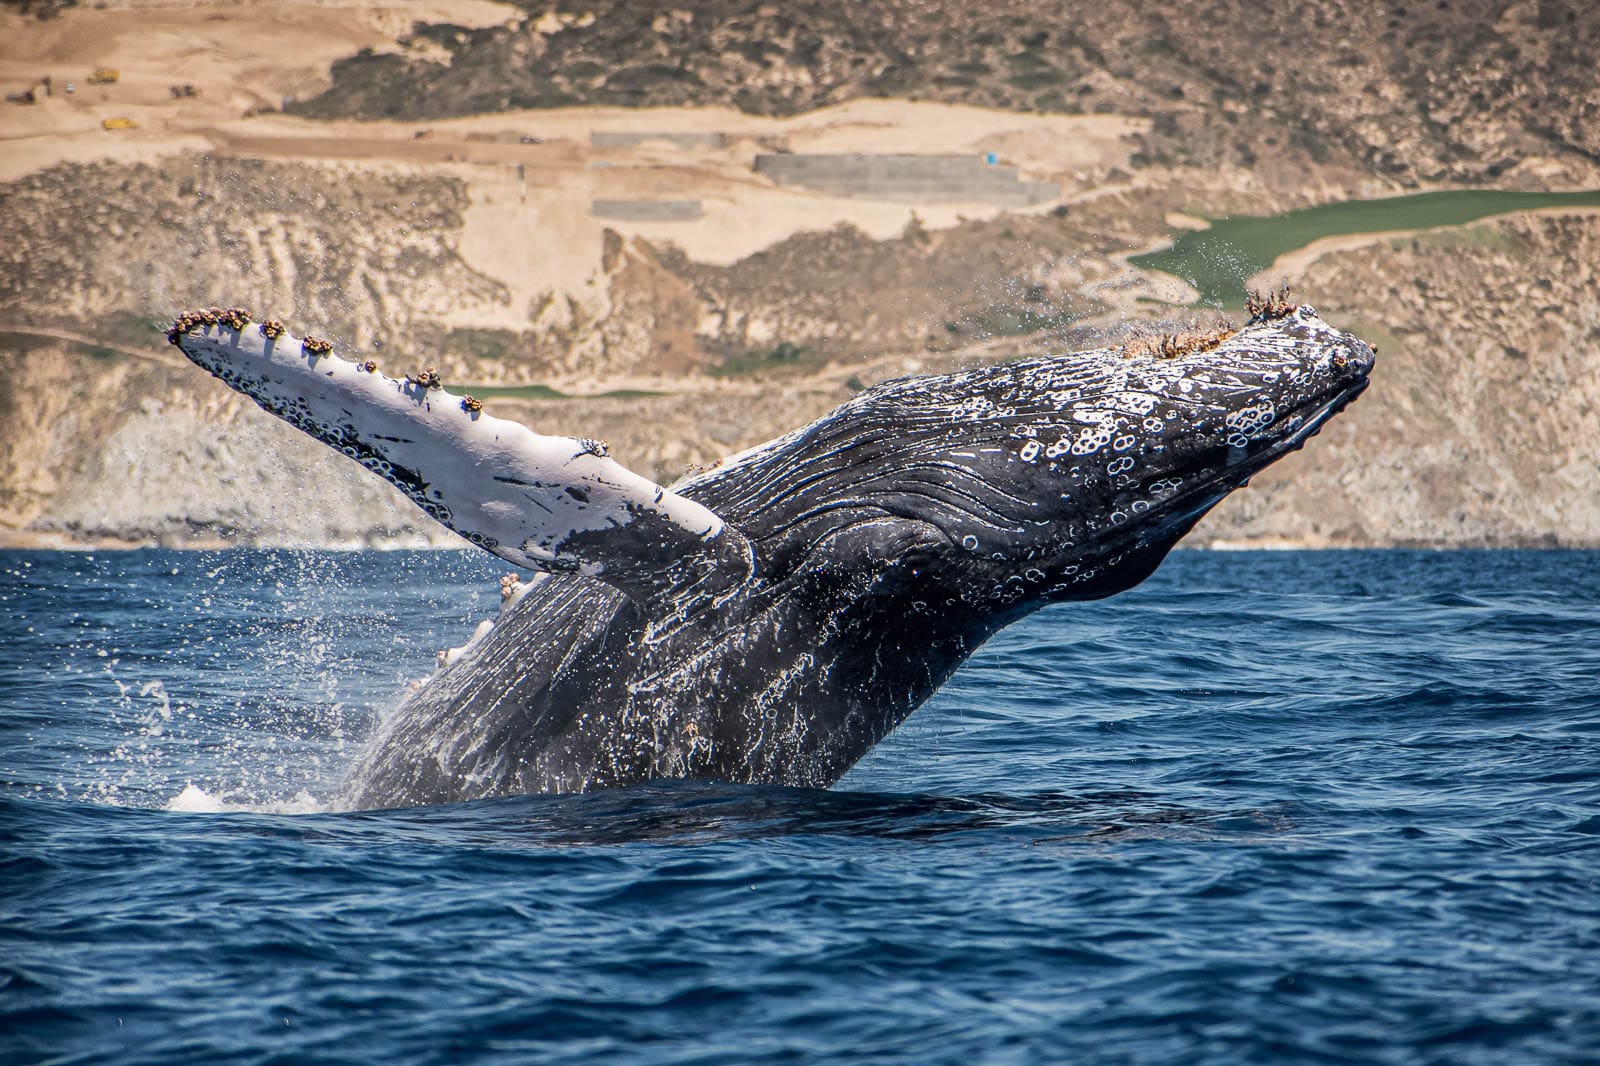 Whale Watching Tours In Cabo